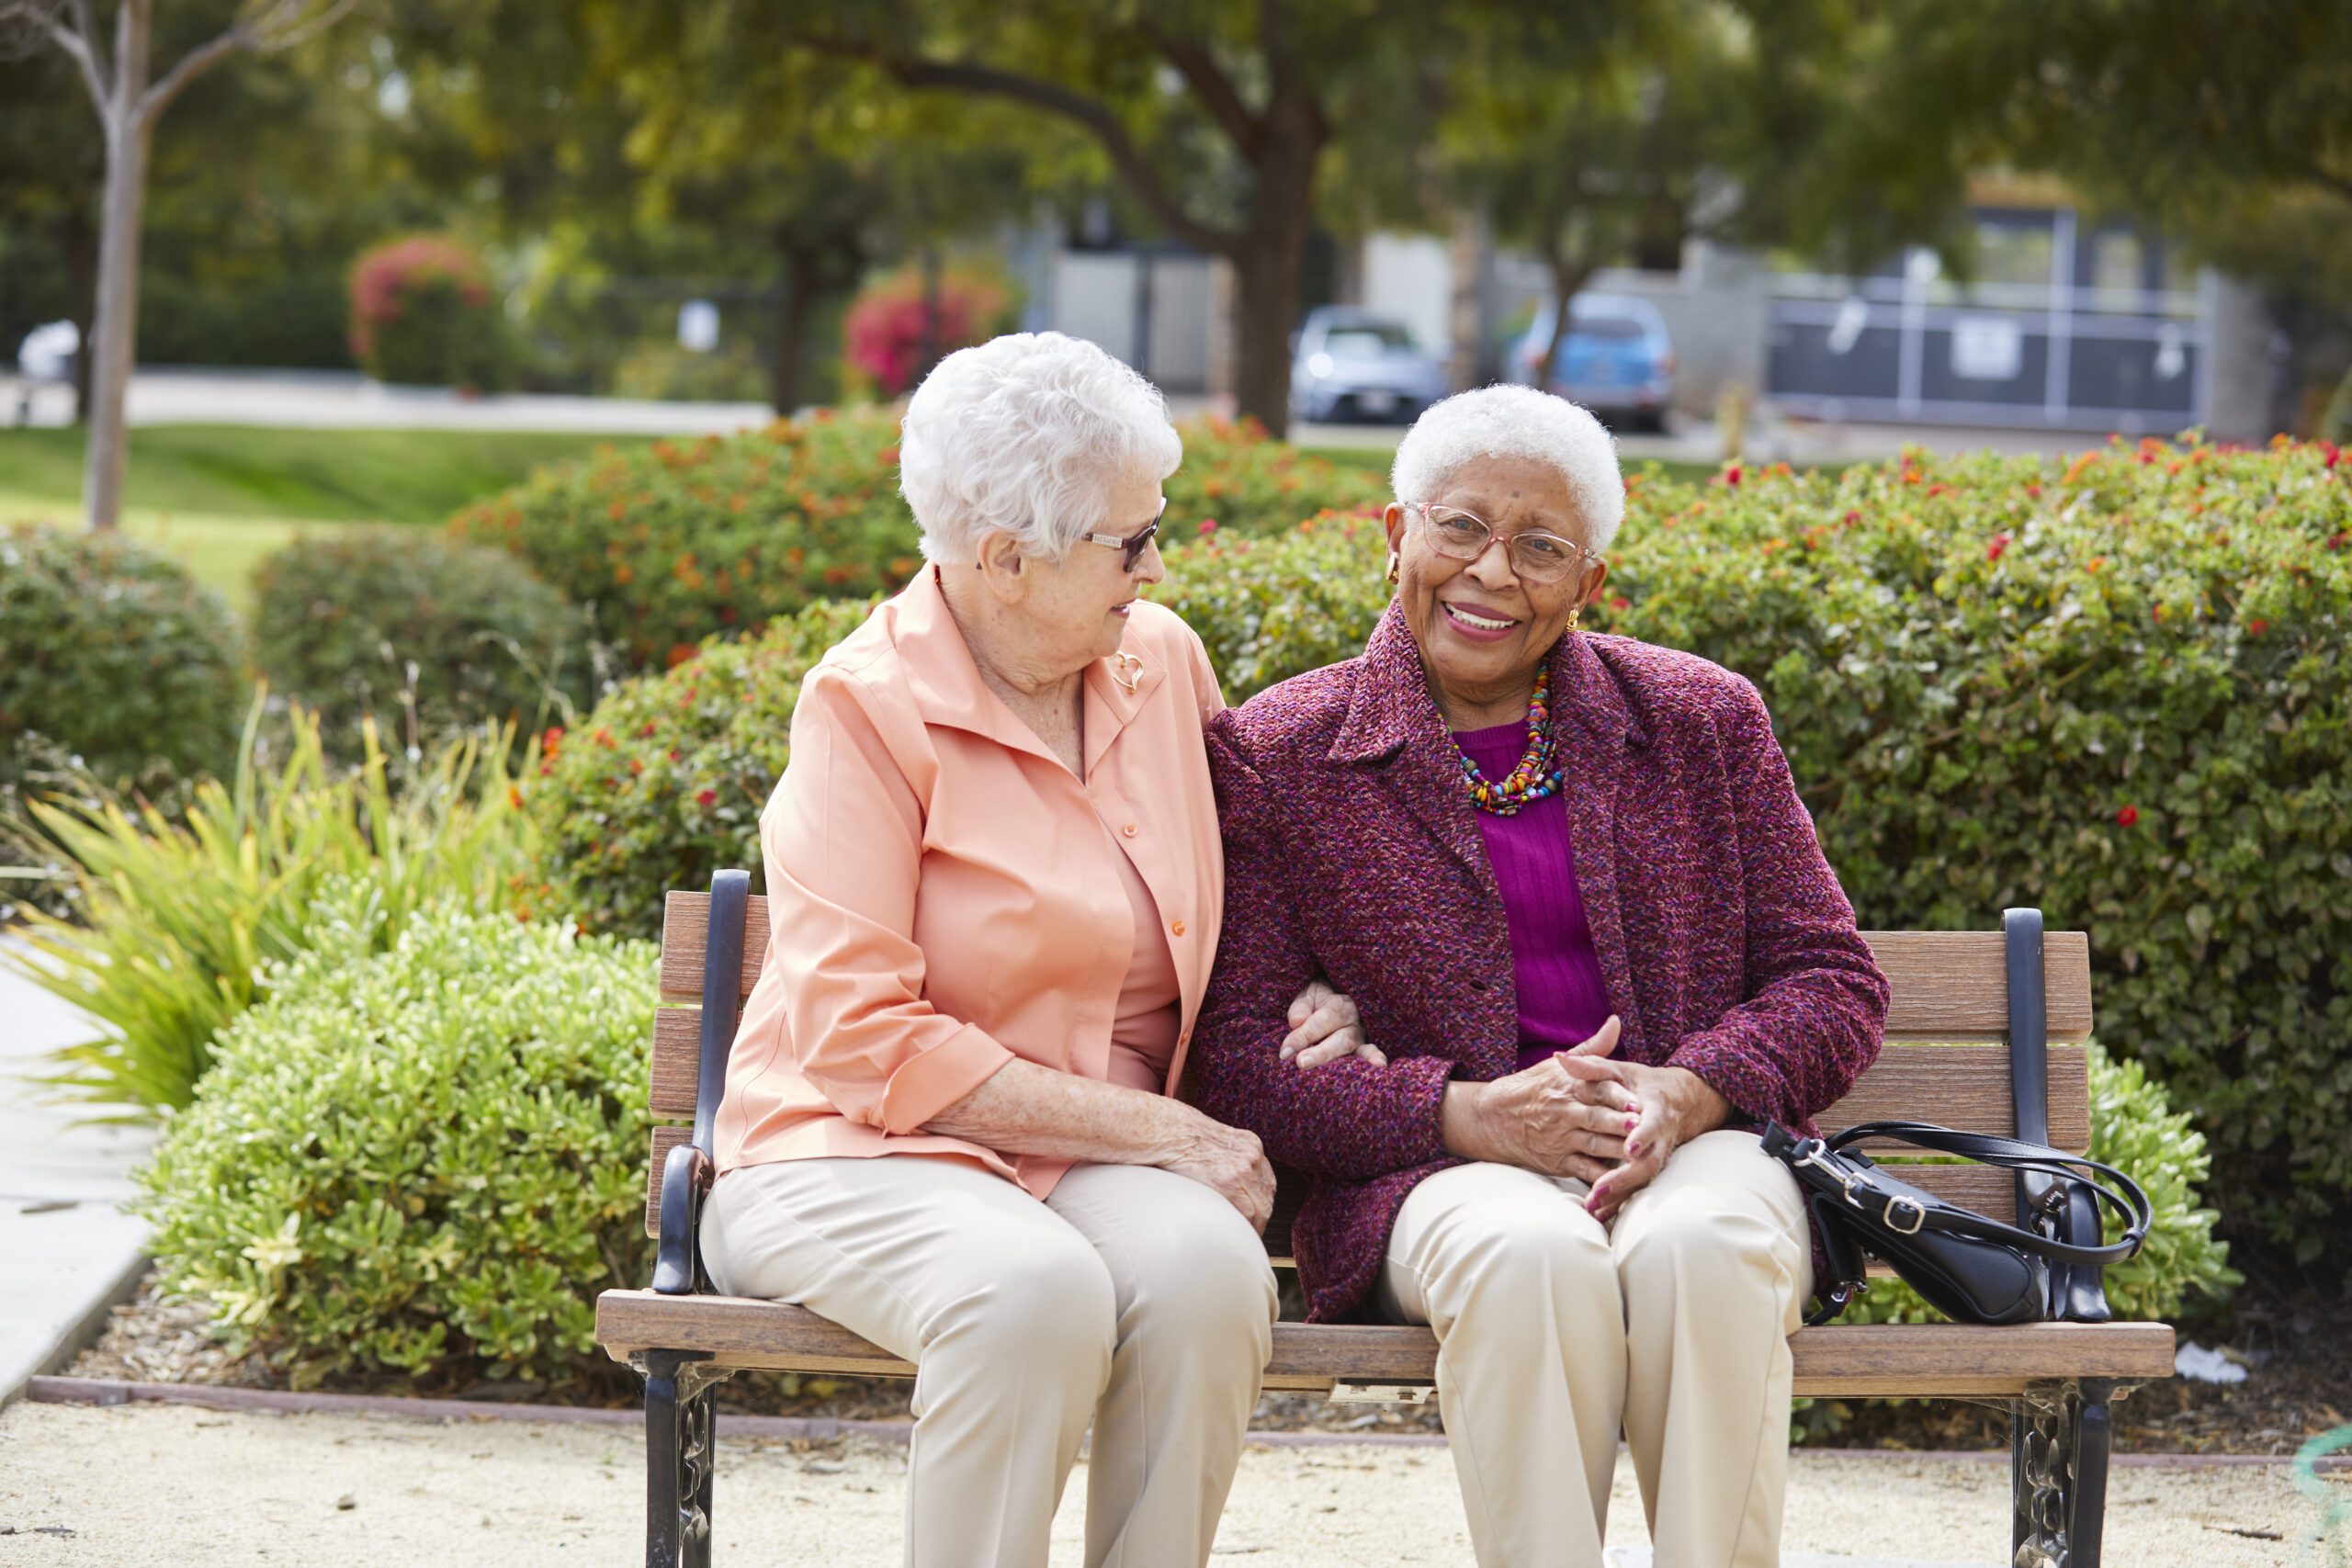 Two women sitting together outside on a bench